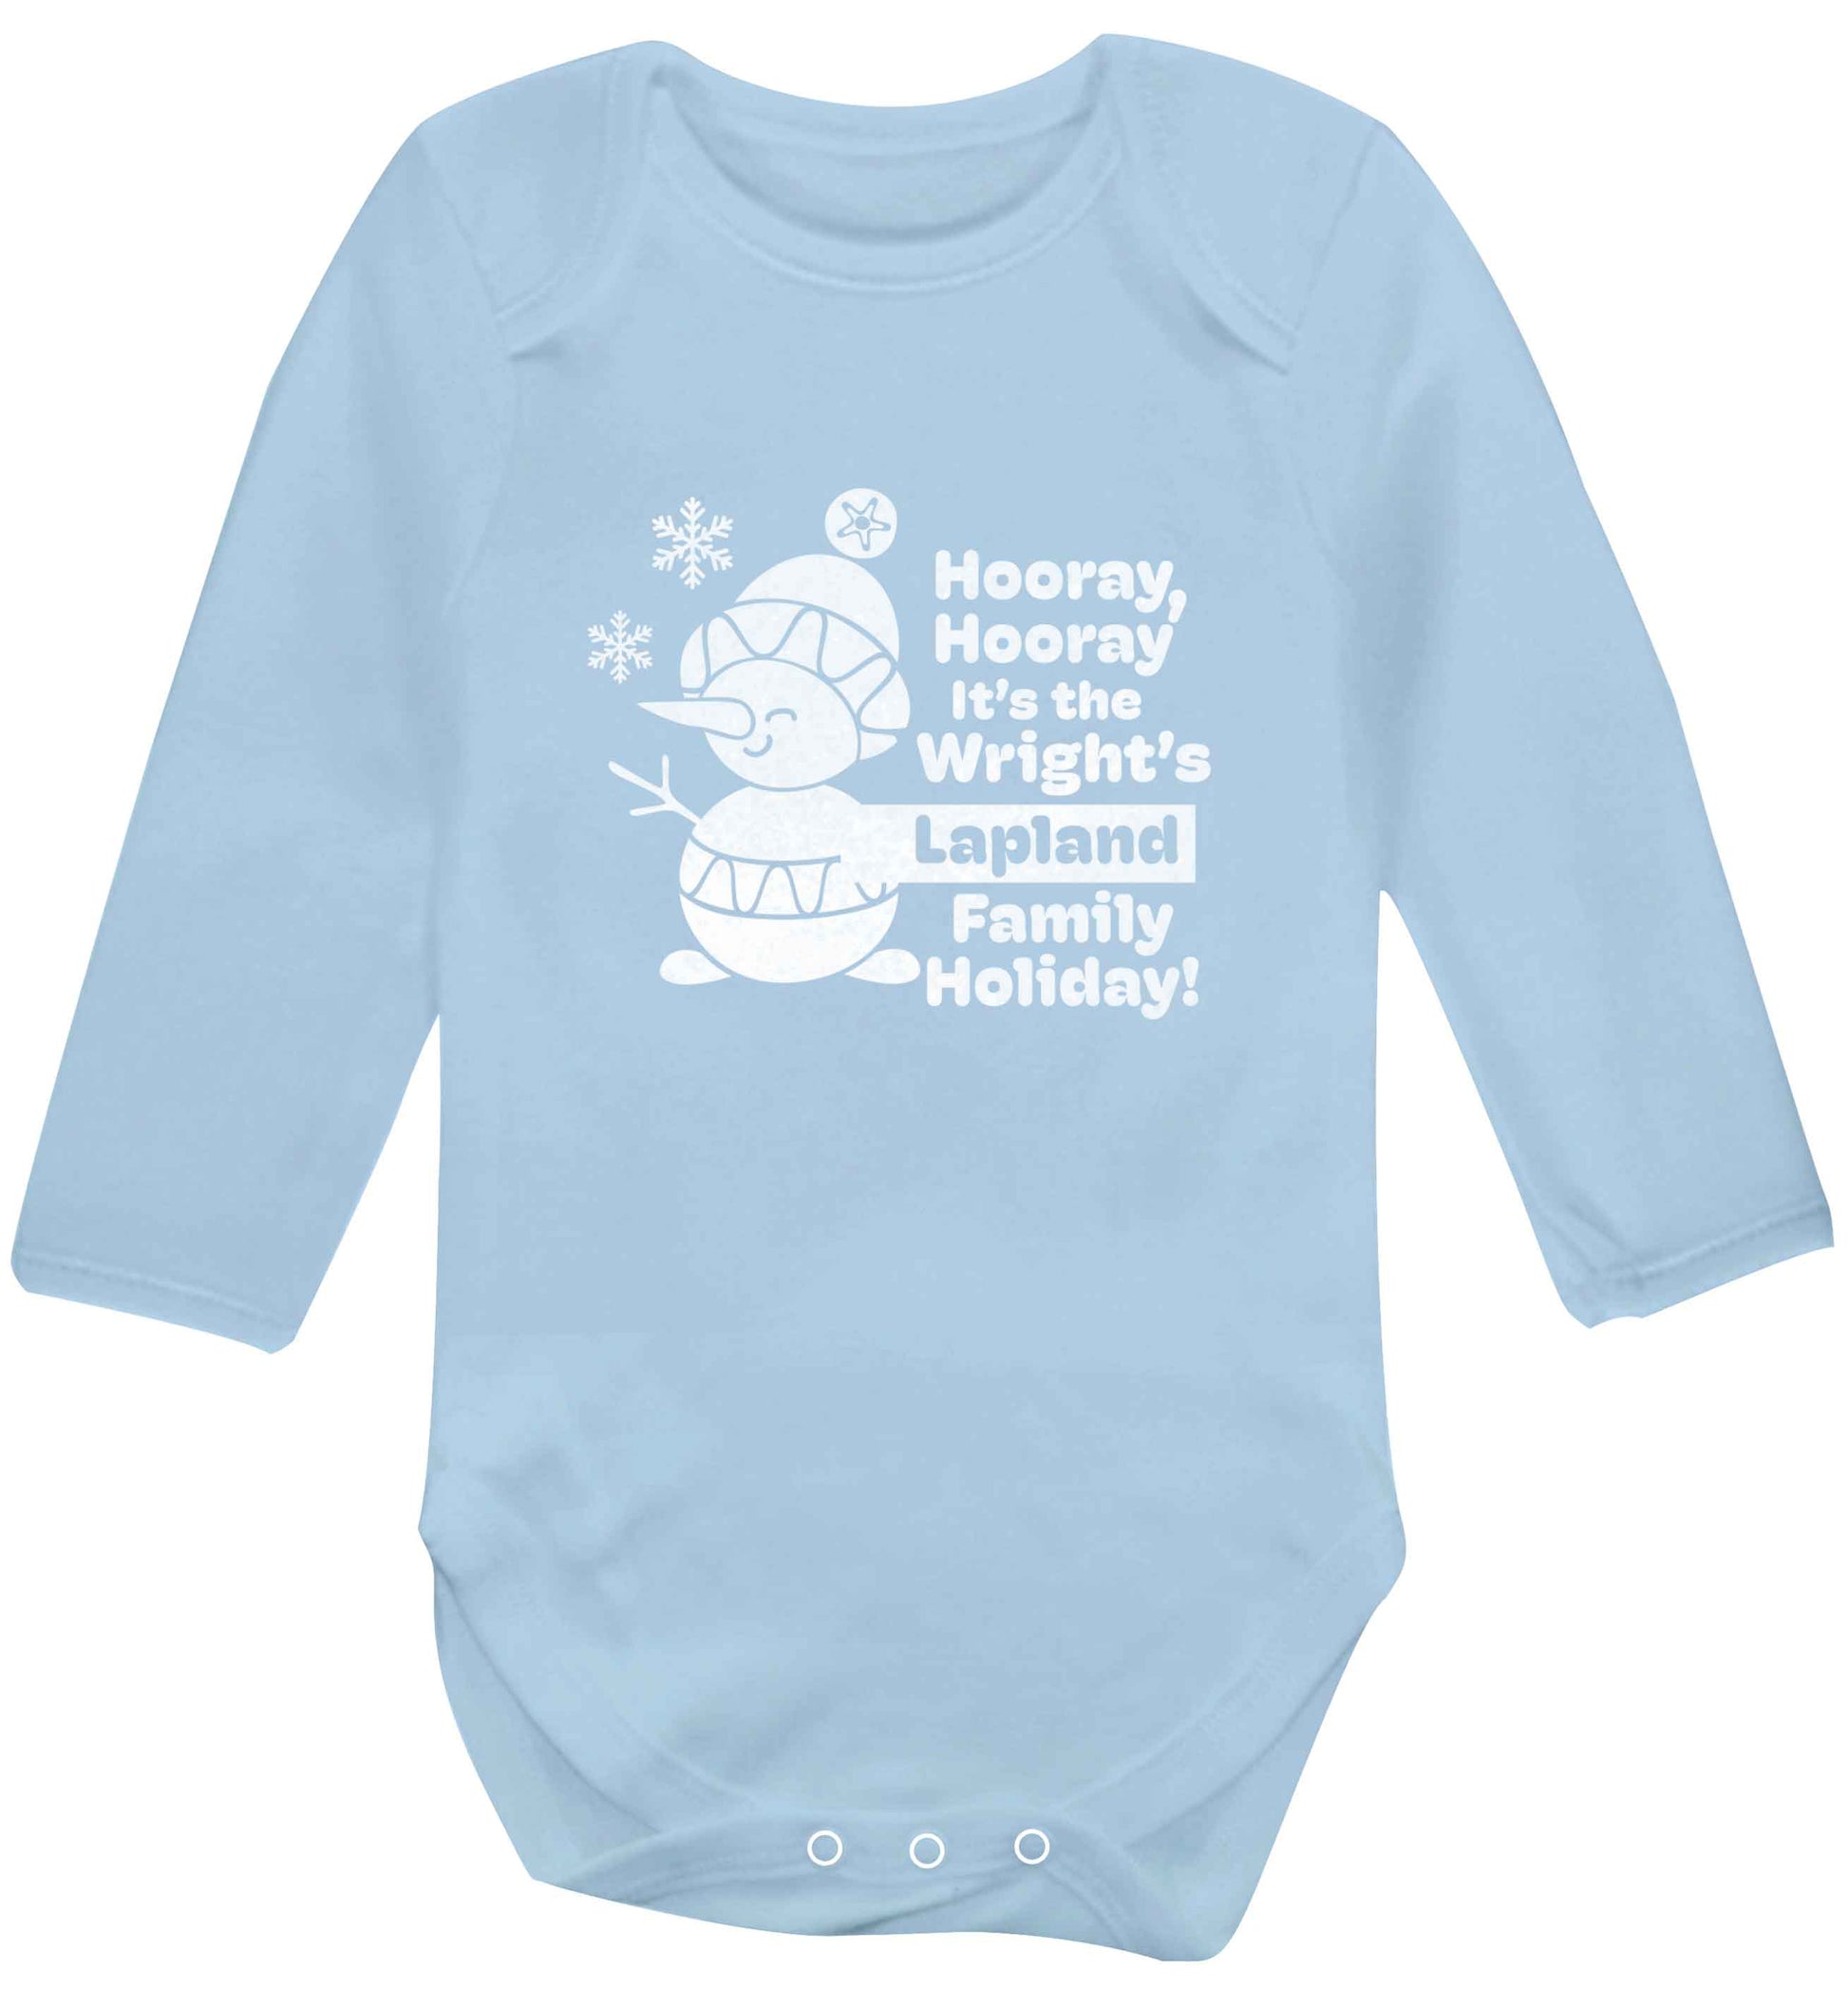 Hooray it's the personalised Lapland holiday! baby vest long sleeved pale blue 6-12 months